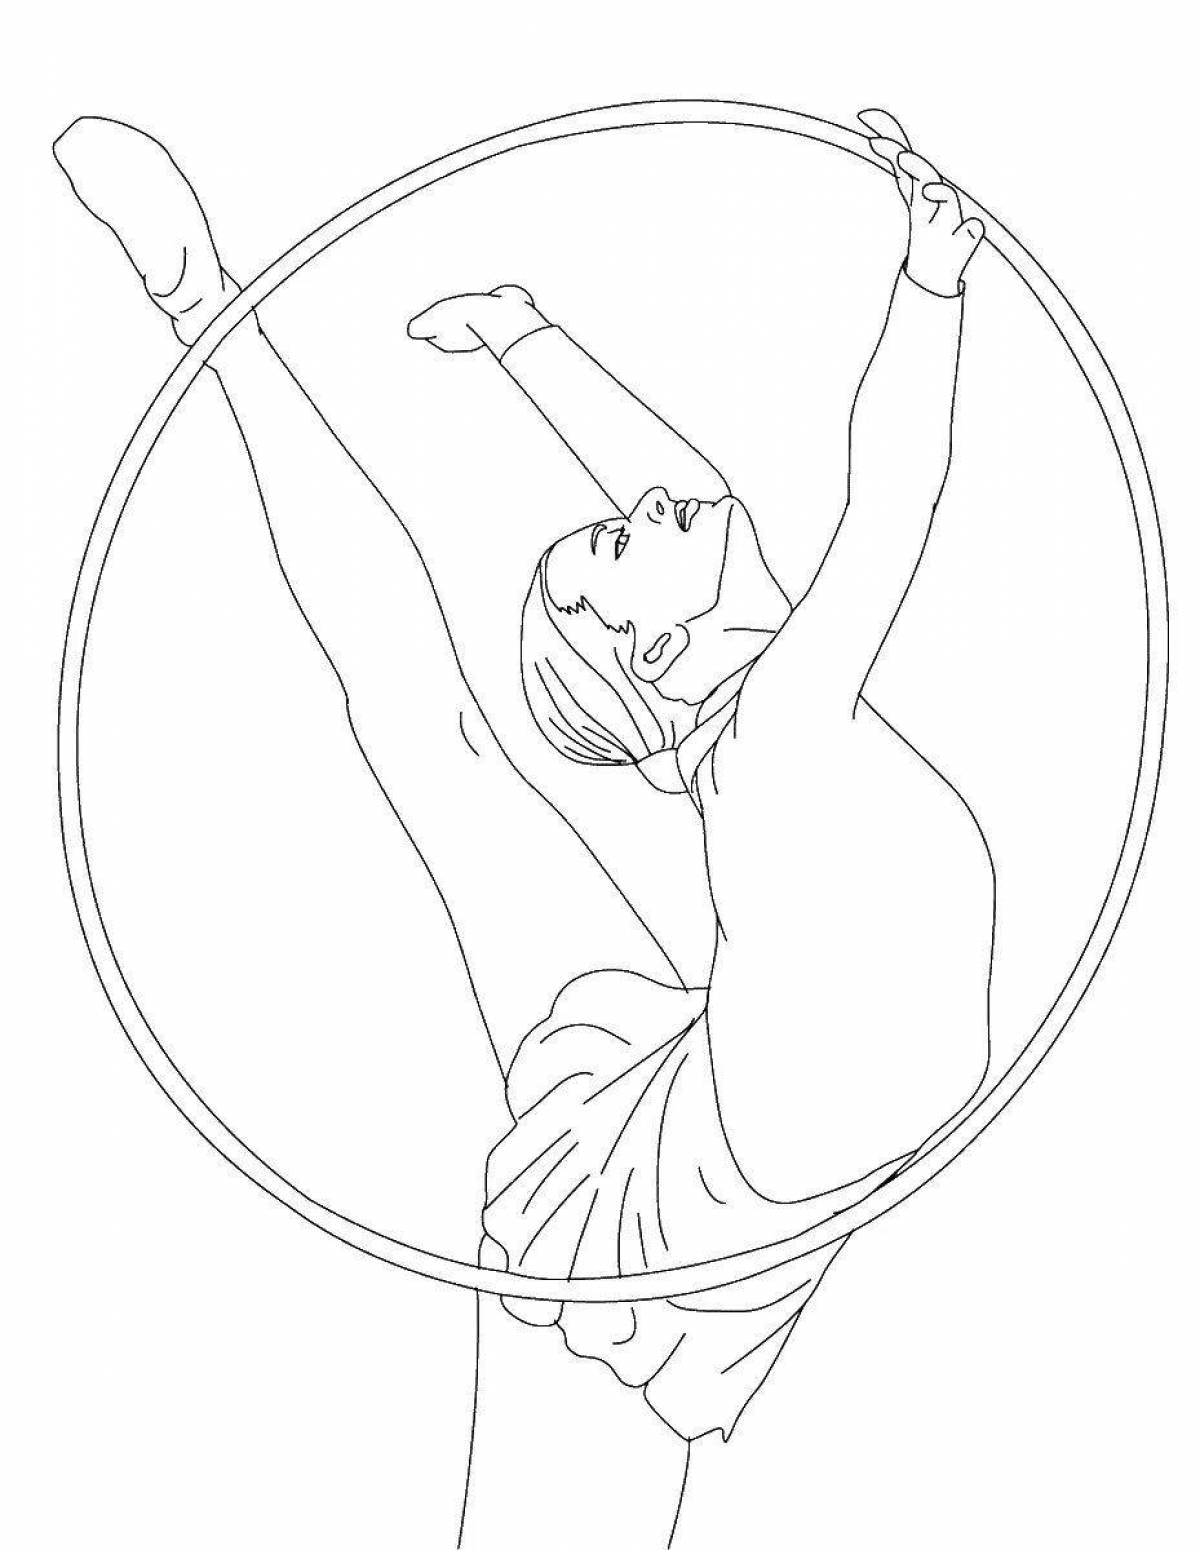 Gymnast coloring book for kids